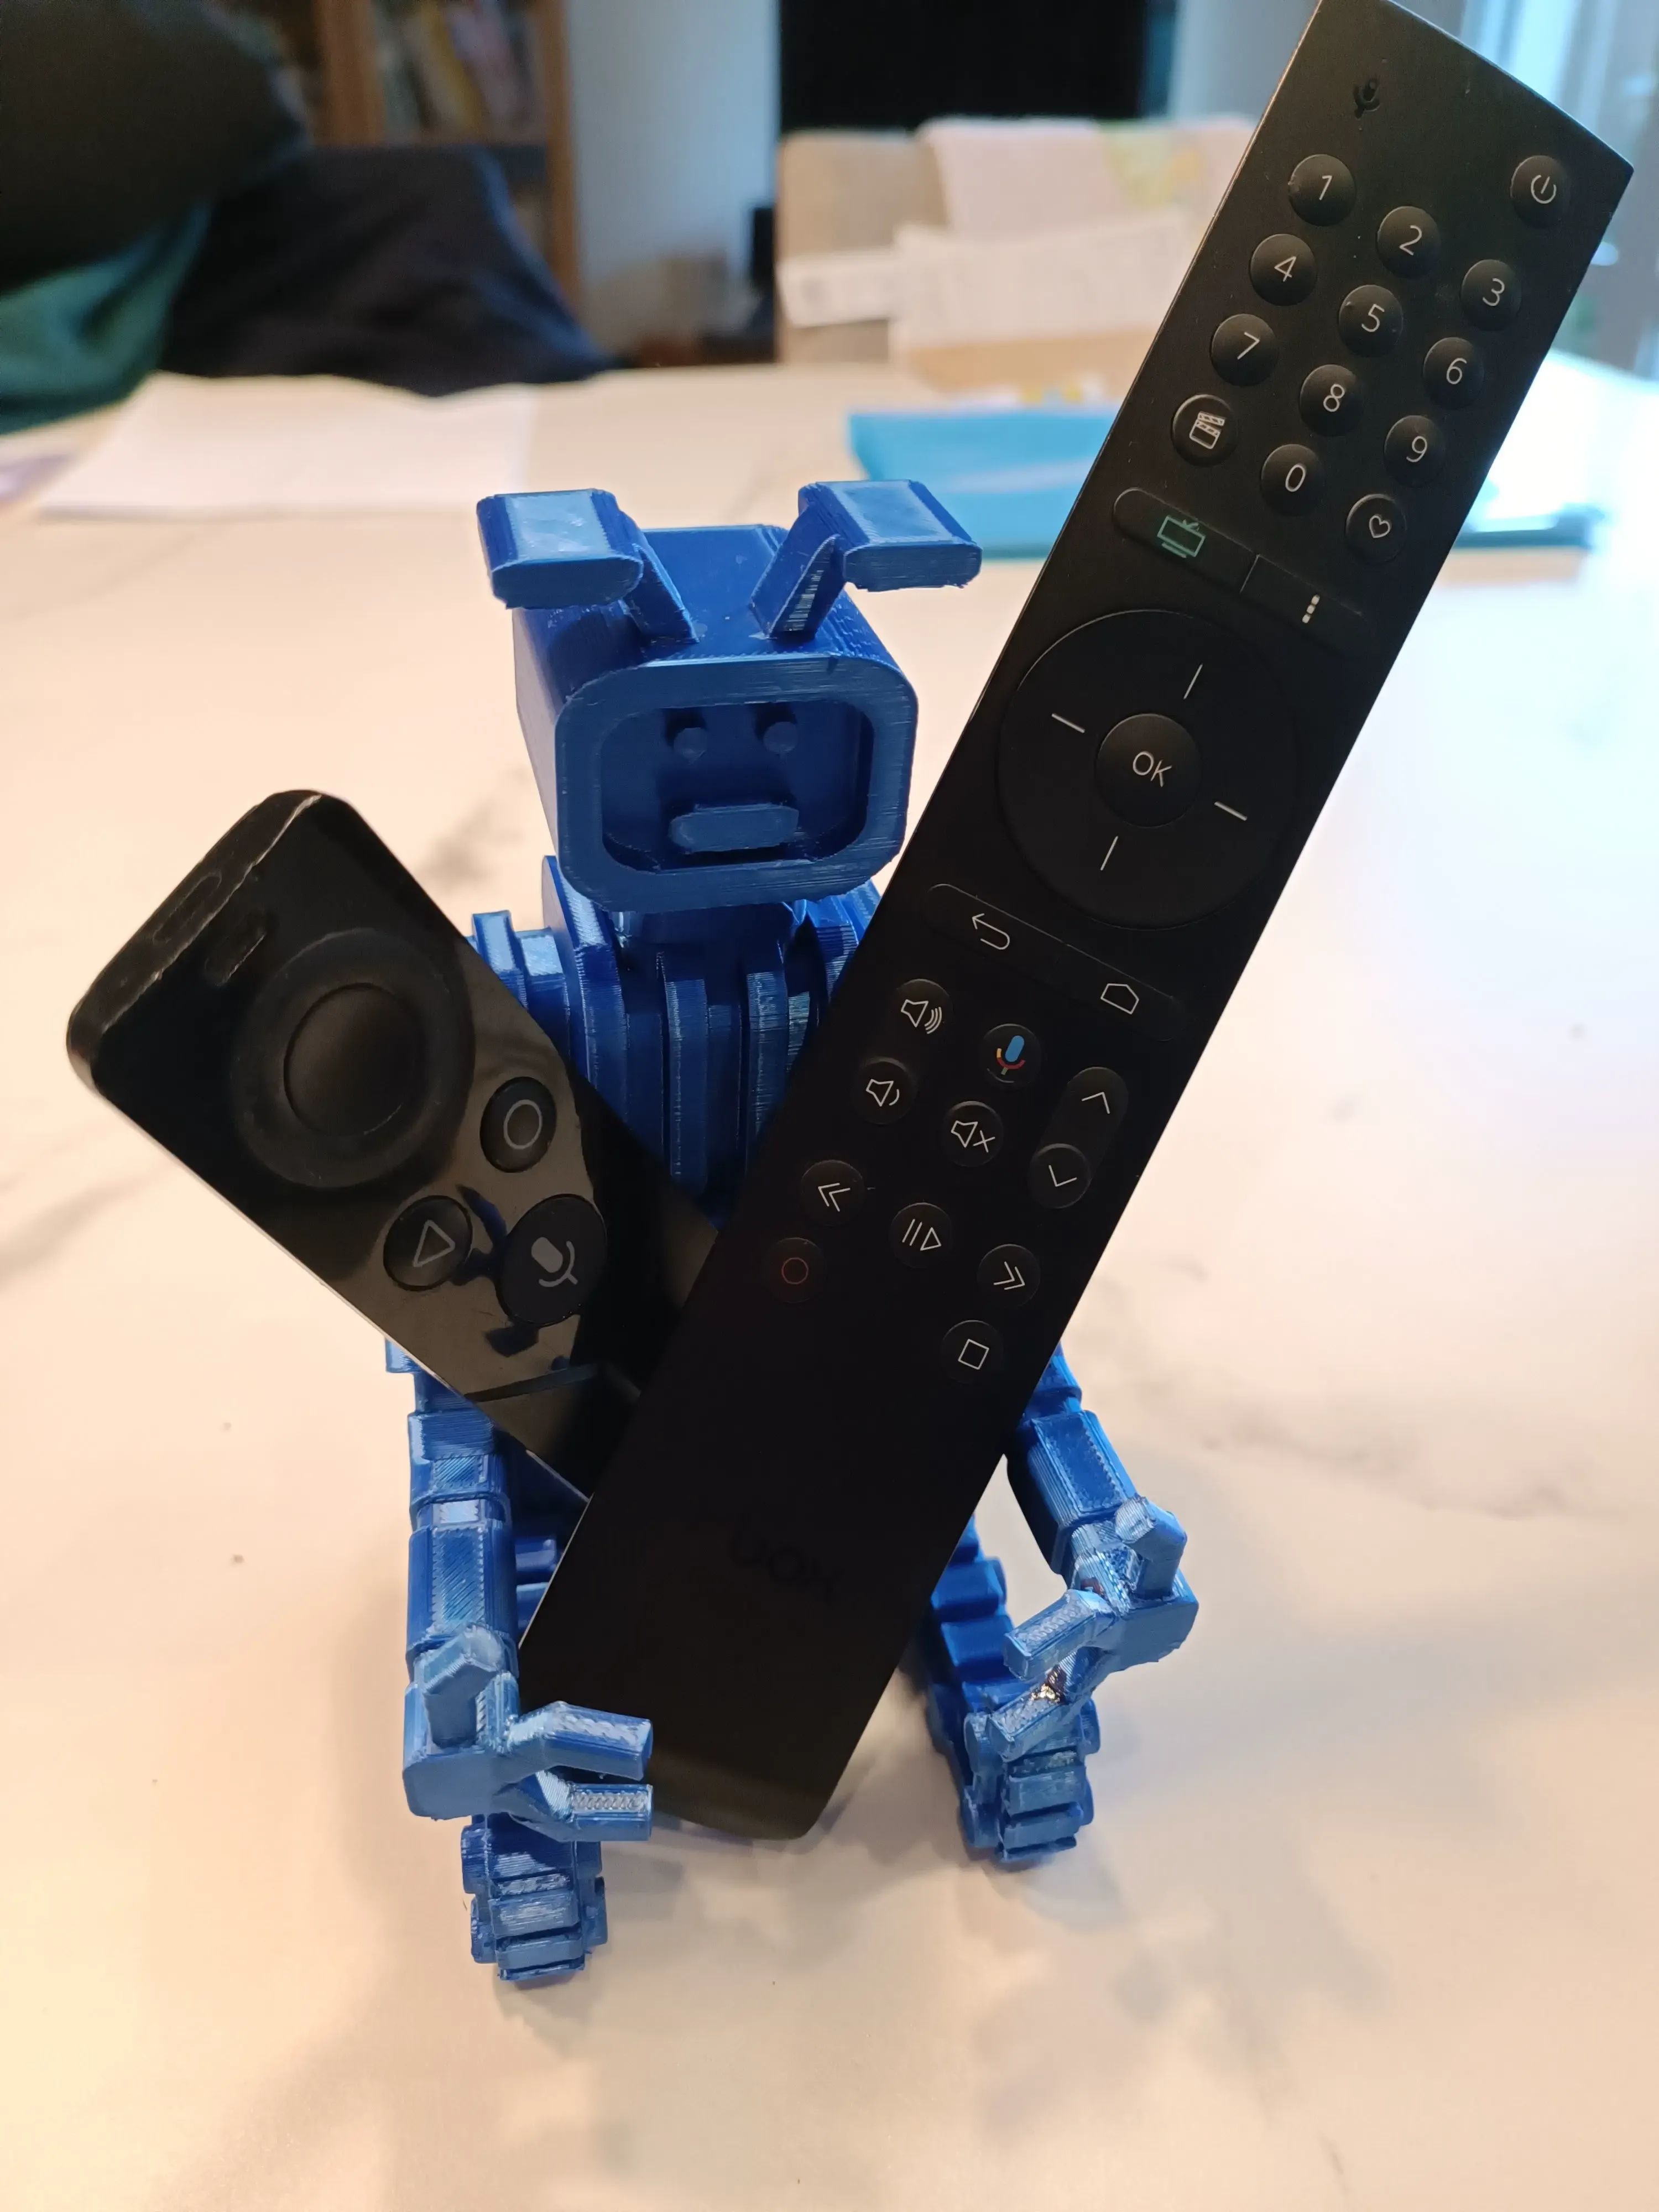 4 Robots Remote Control Support